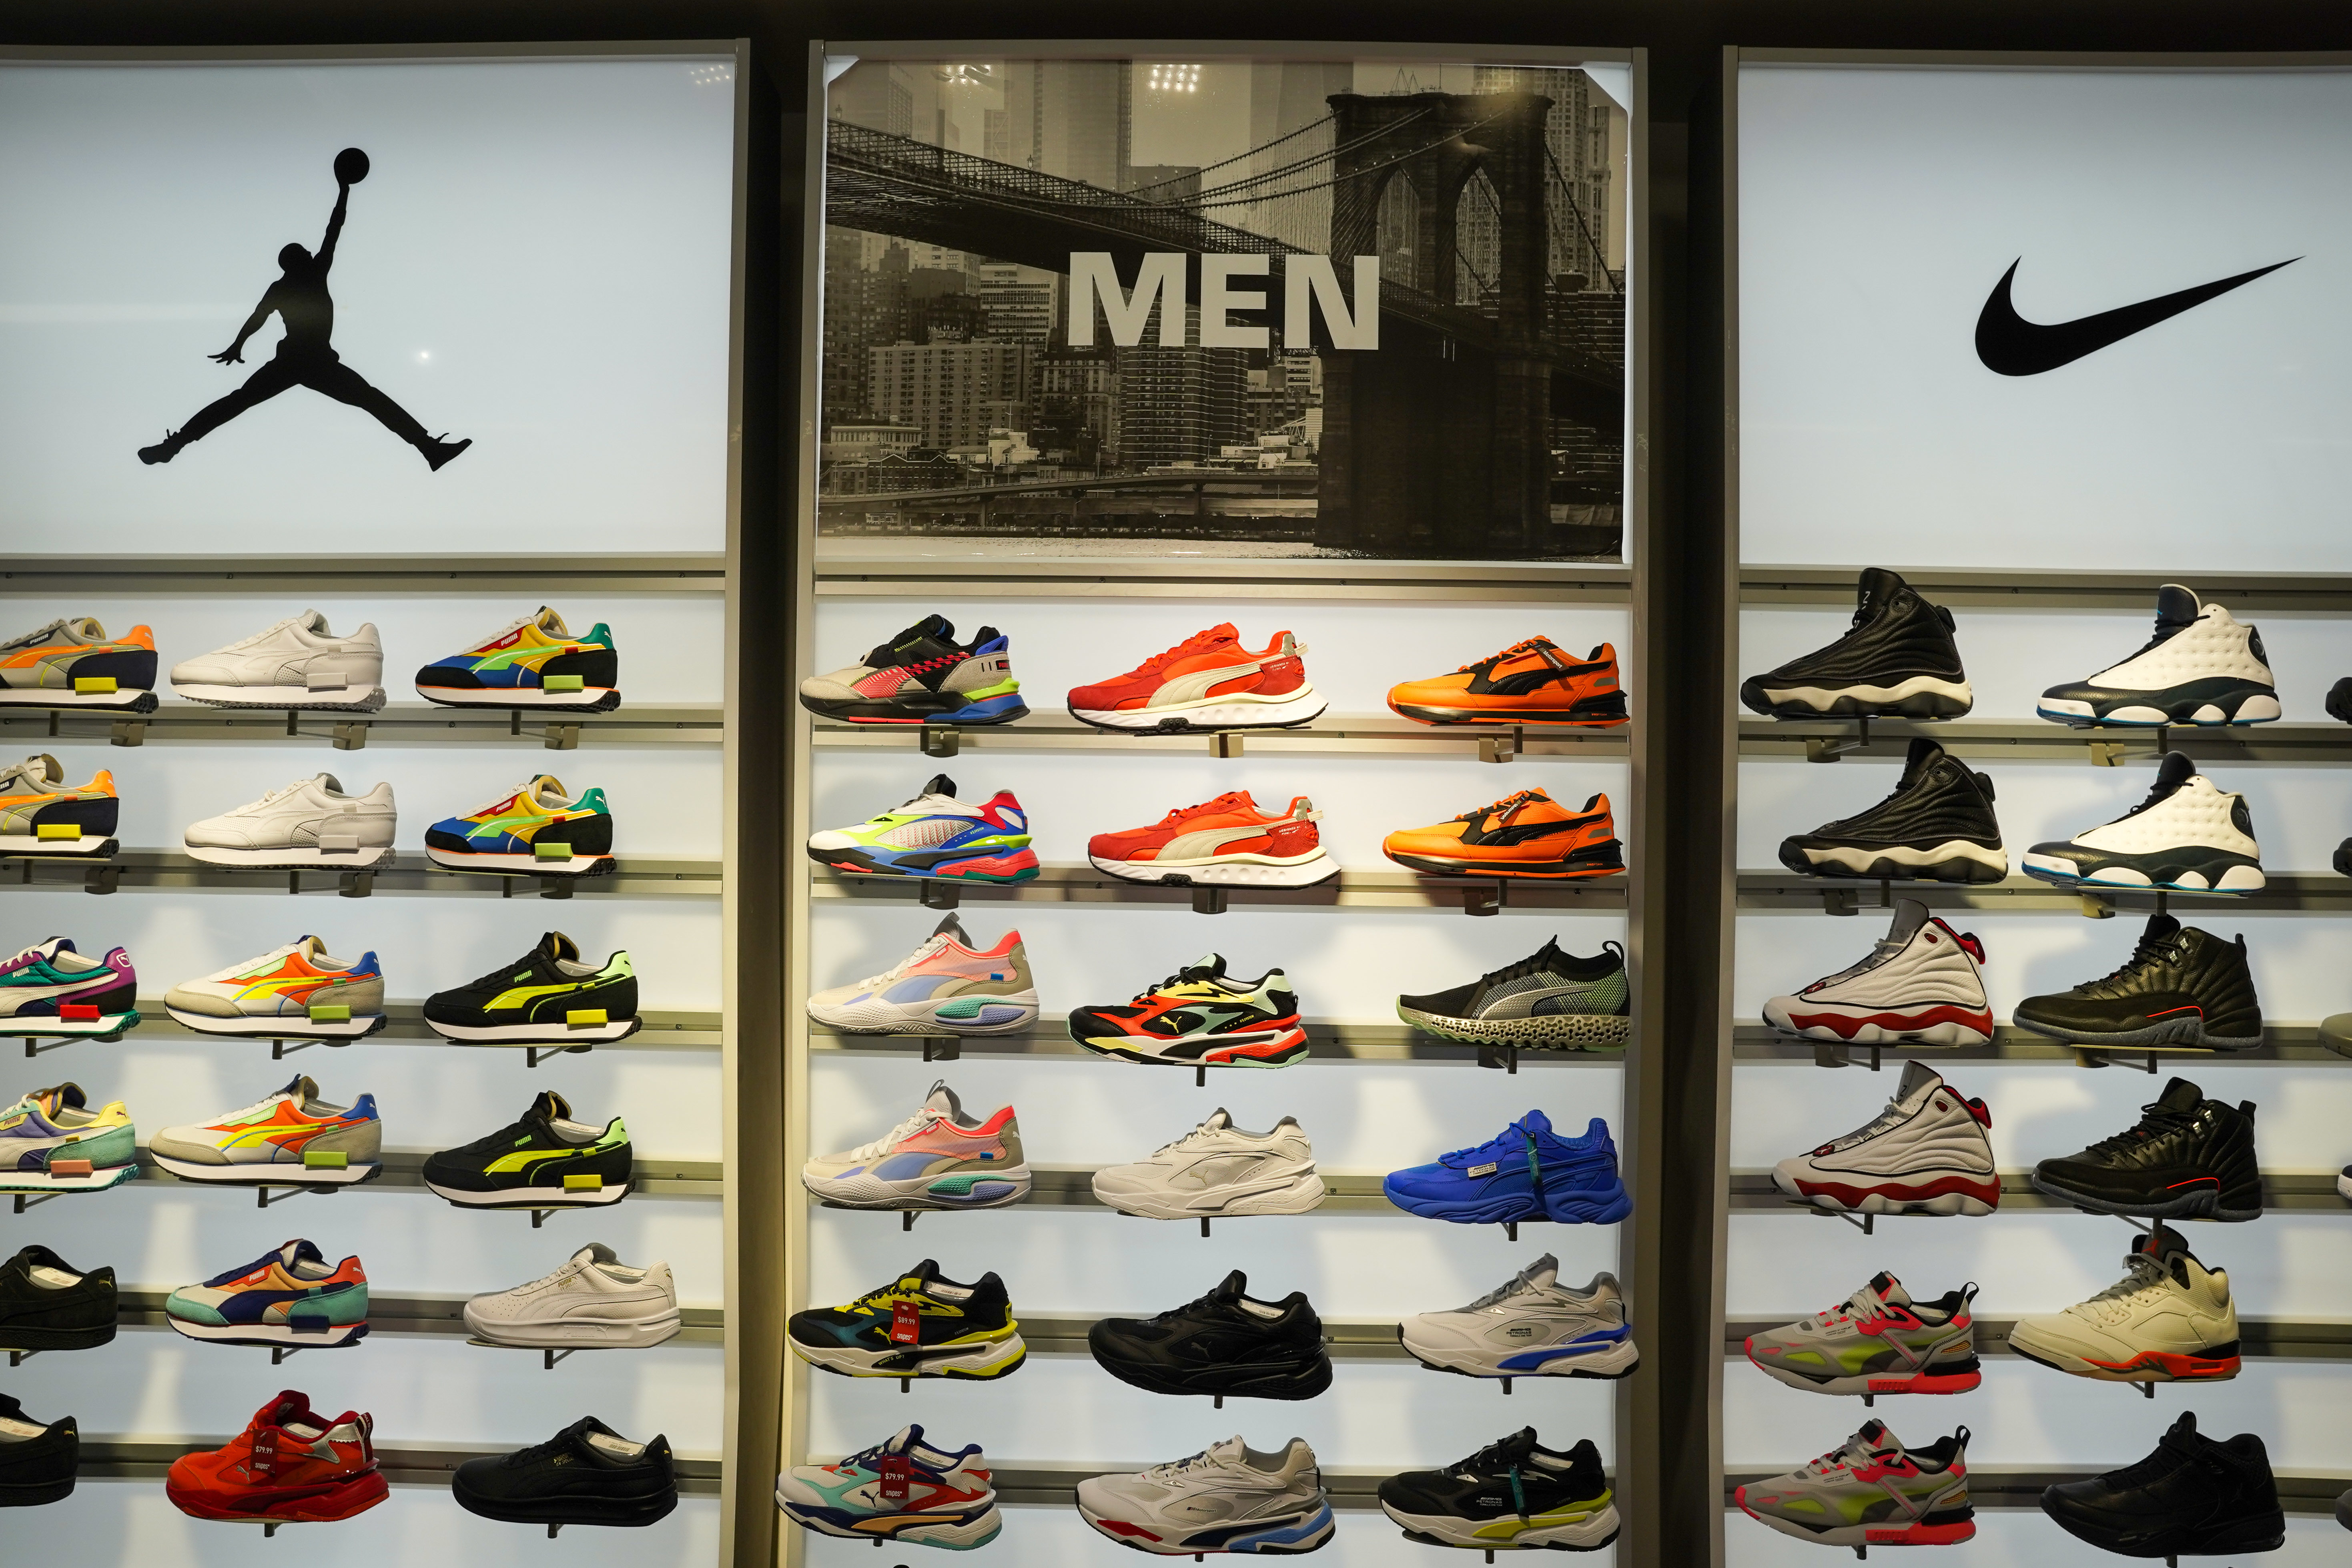 The 10 sneaker stores